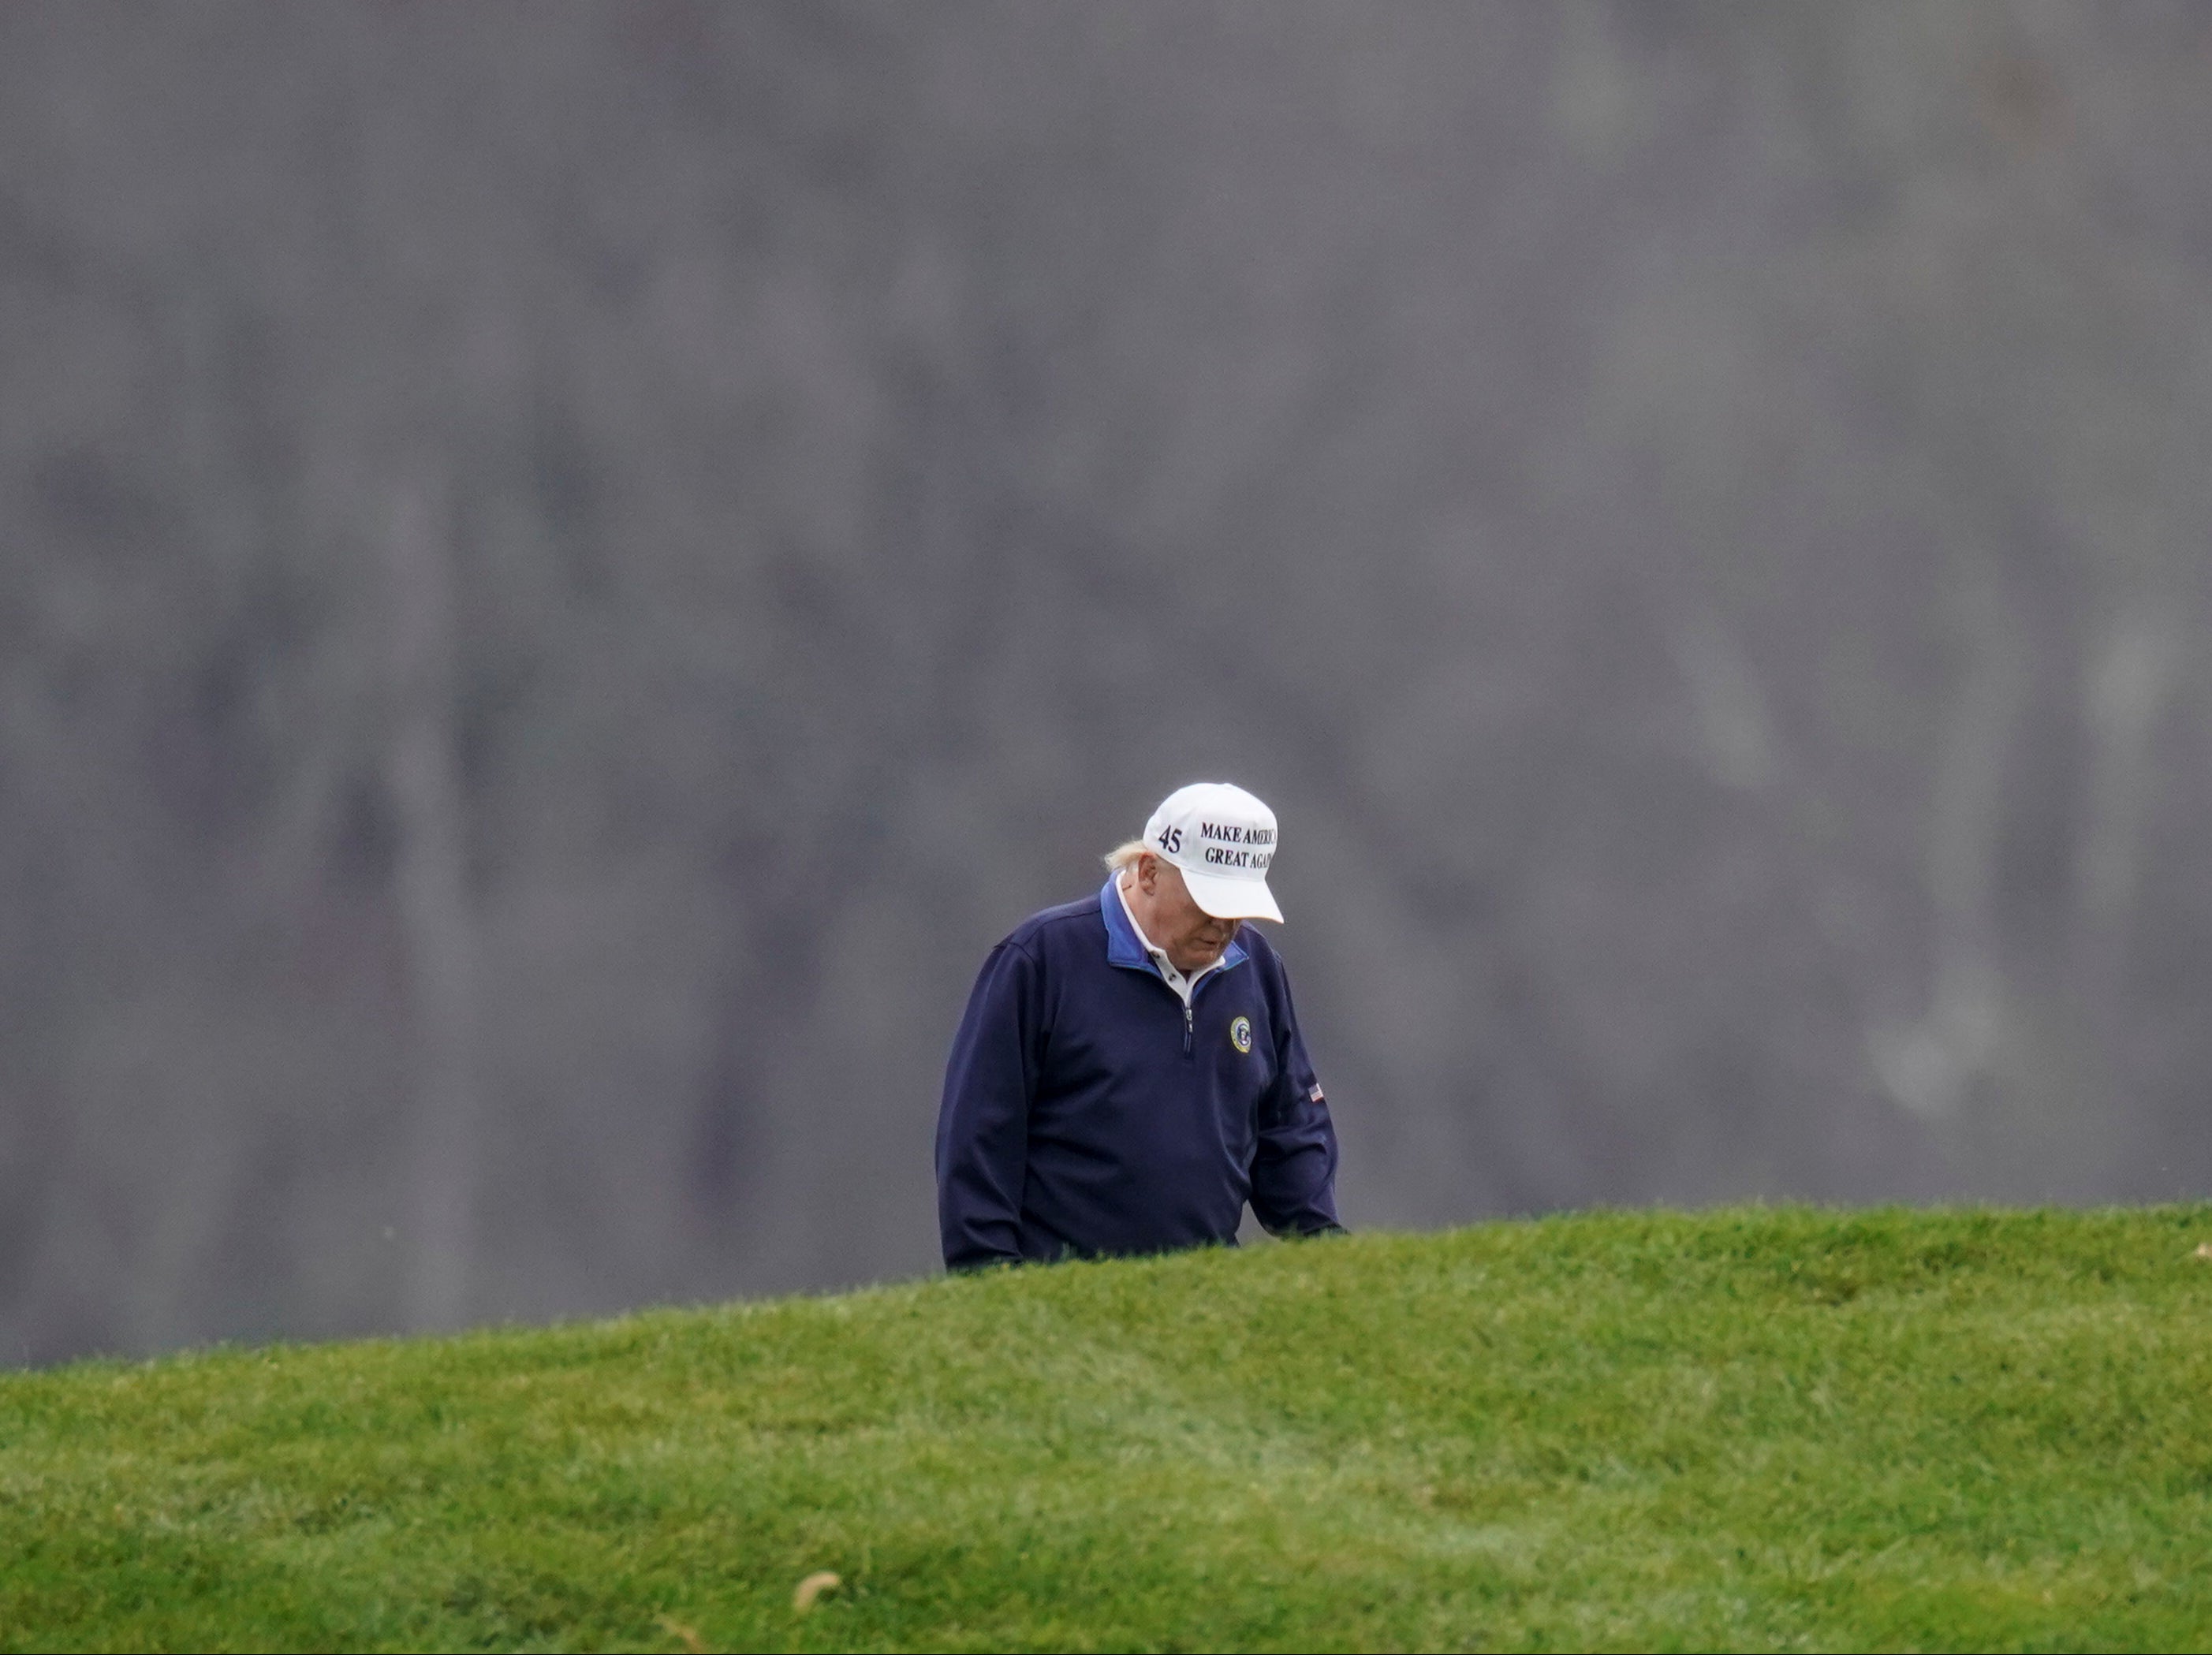 Donald Trump plays golf at the Trump National Golf Club in Sterling, Virginia after appearing to have briefly accepted the result of the 2020 election